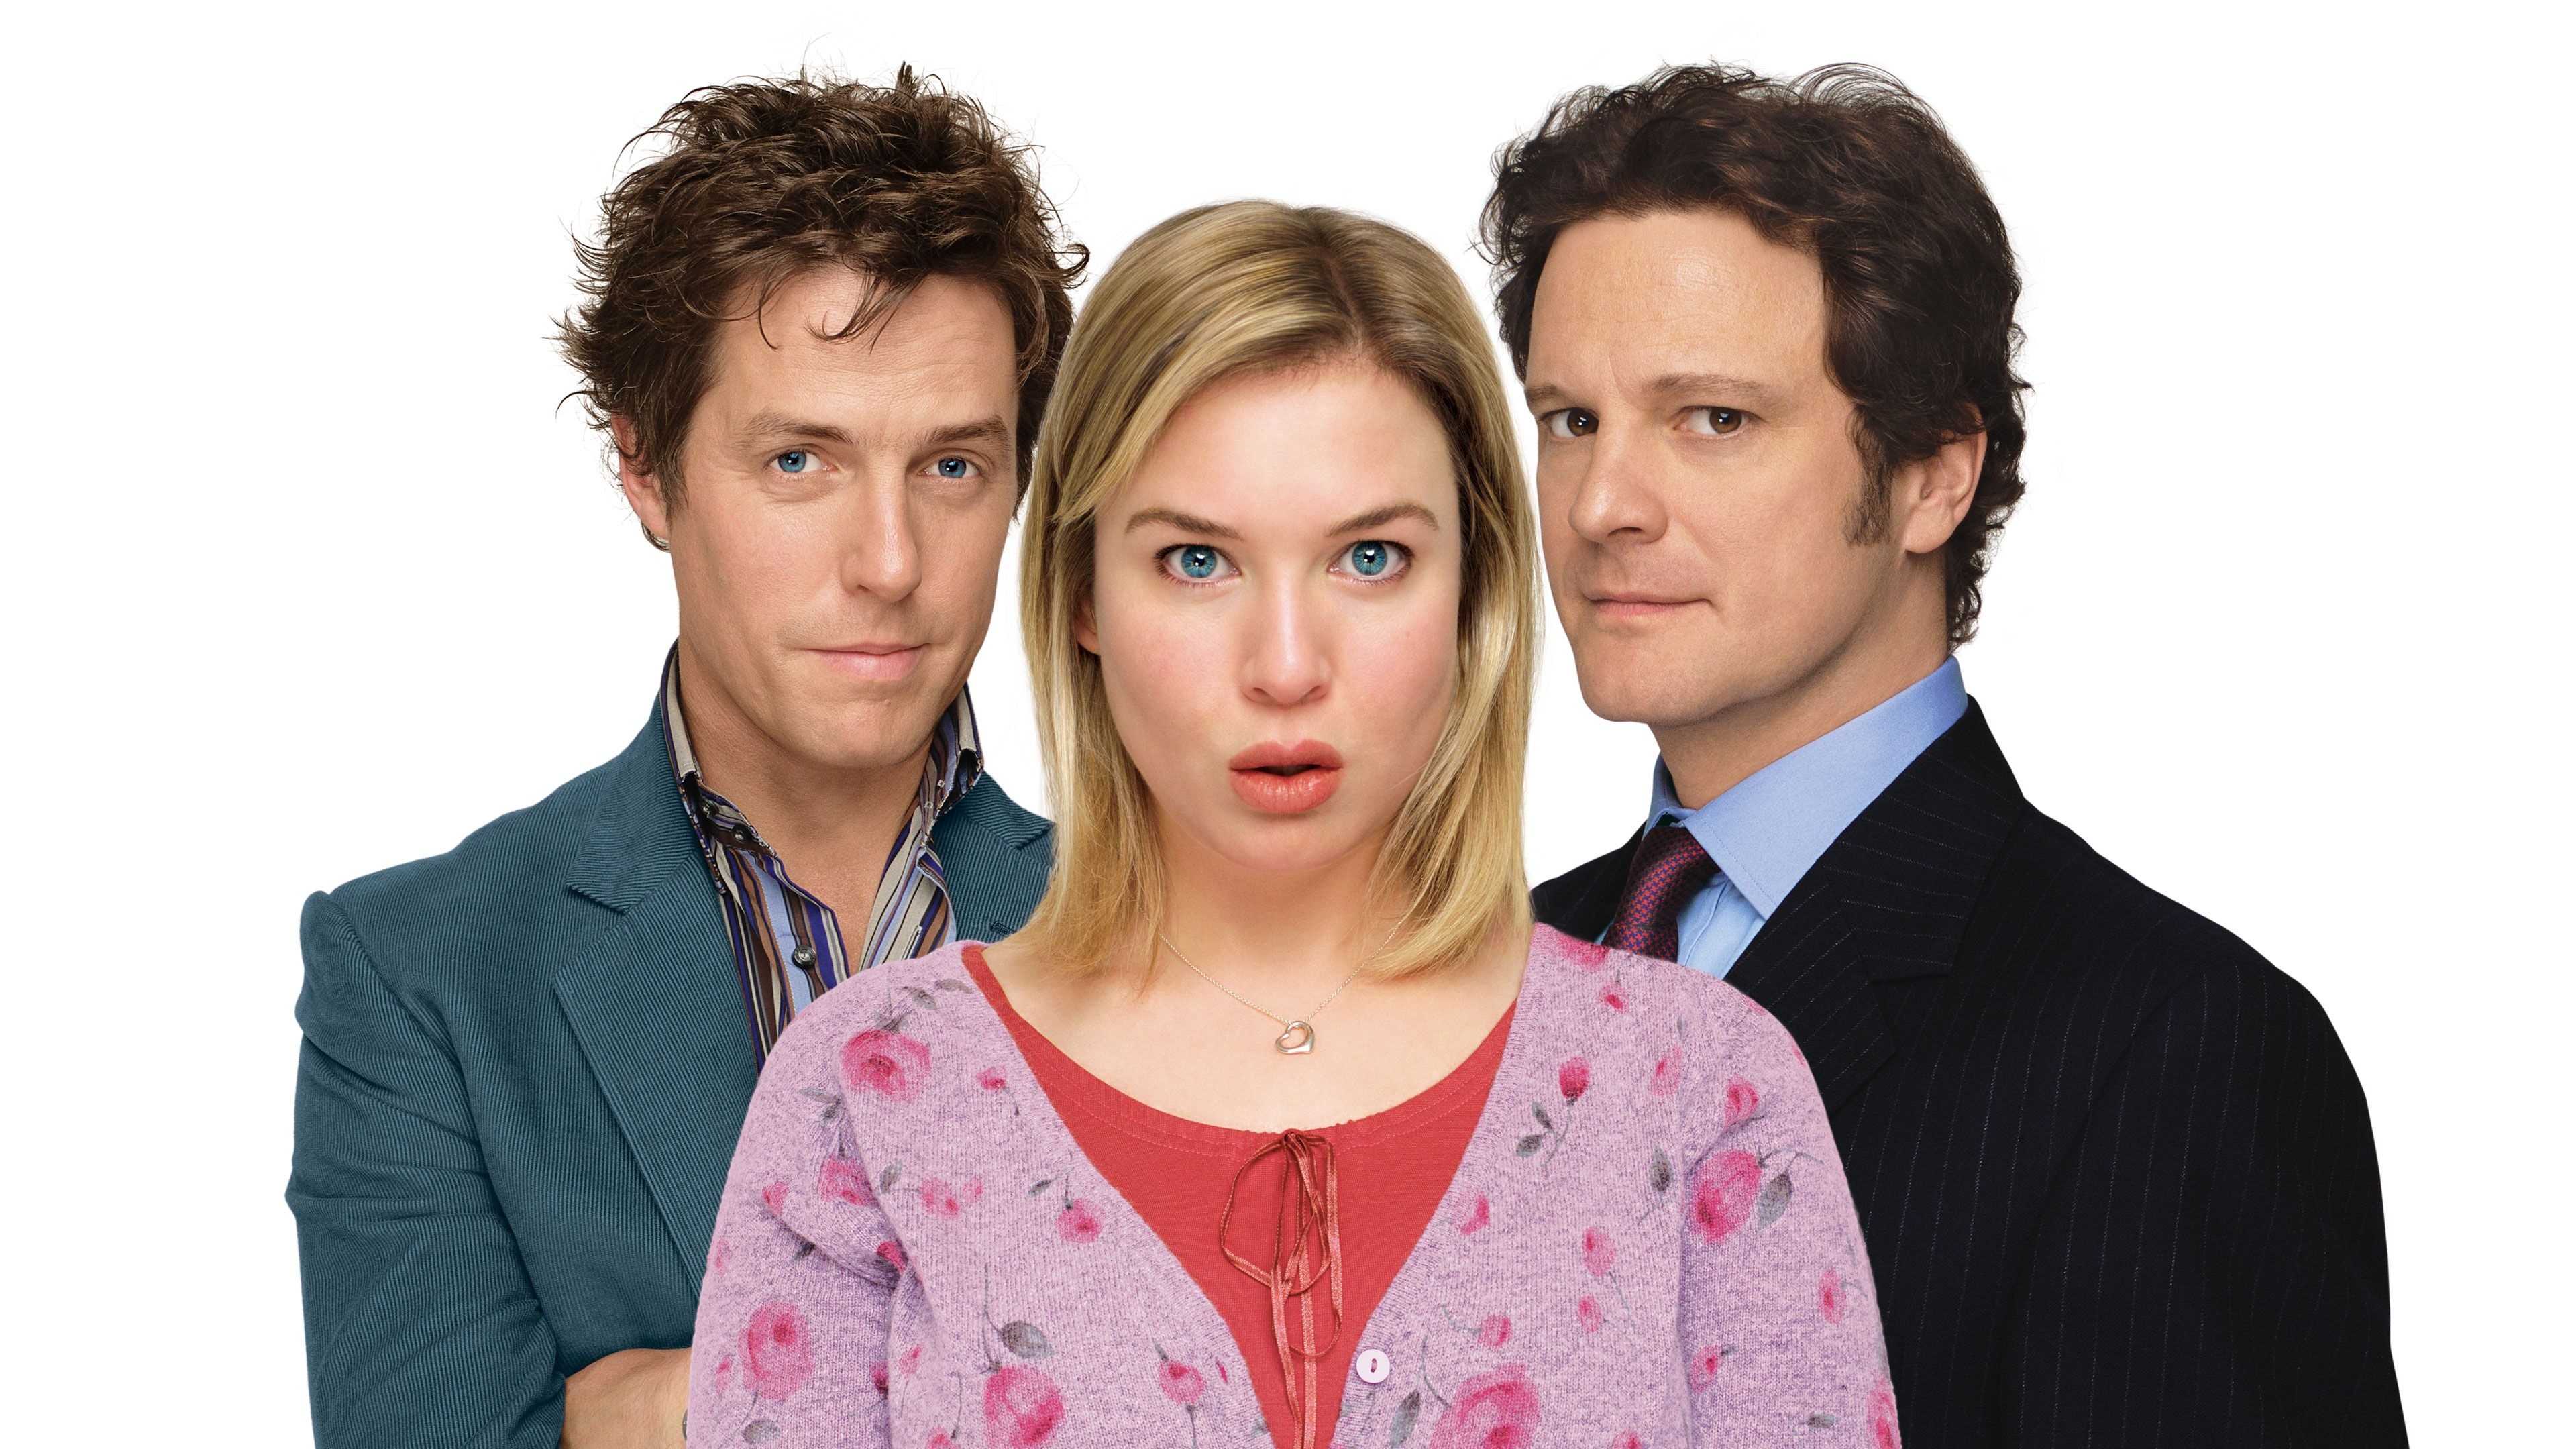 Mark Darcy movies, Movies Anywhere, The Edge of Reason, Online streaming, 3840x2160 4K Desktop